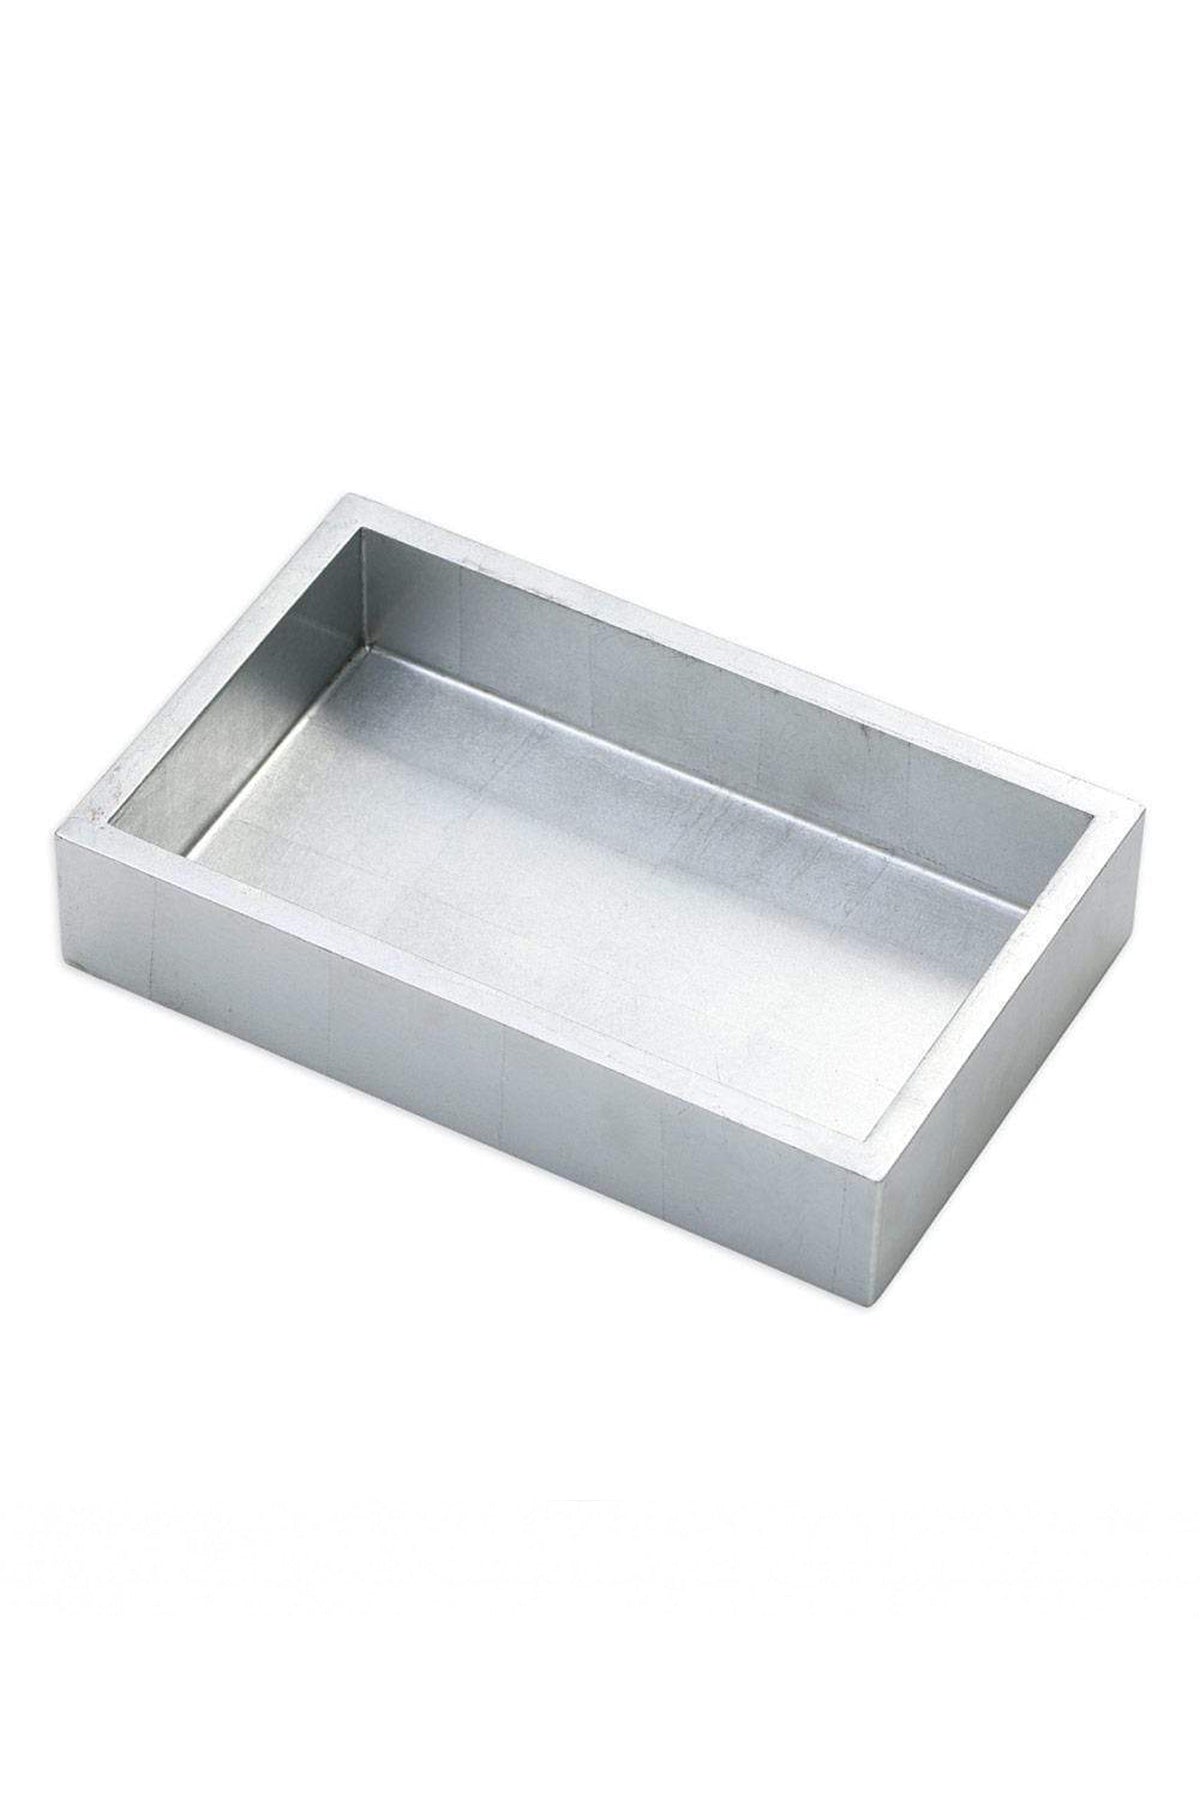 Lacquer Guest Towel Napkin Holder in Silver - shop-olivia.com